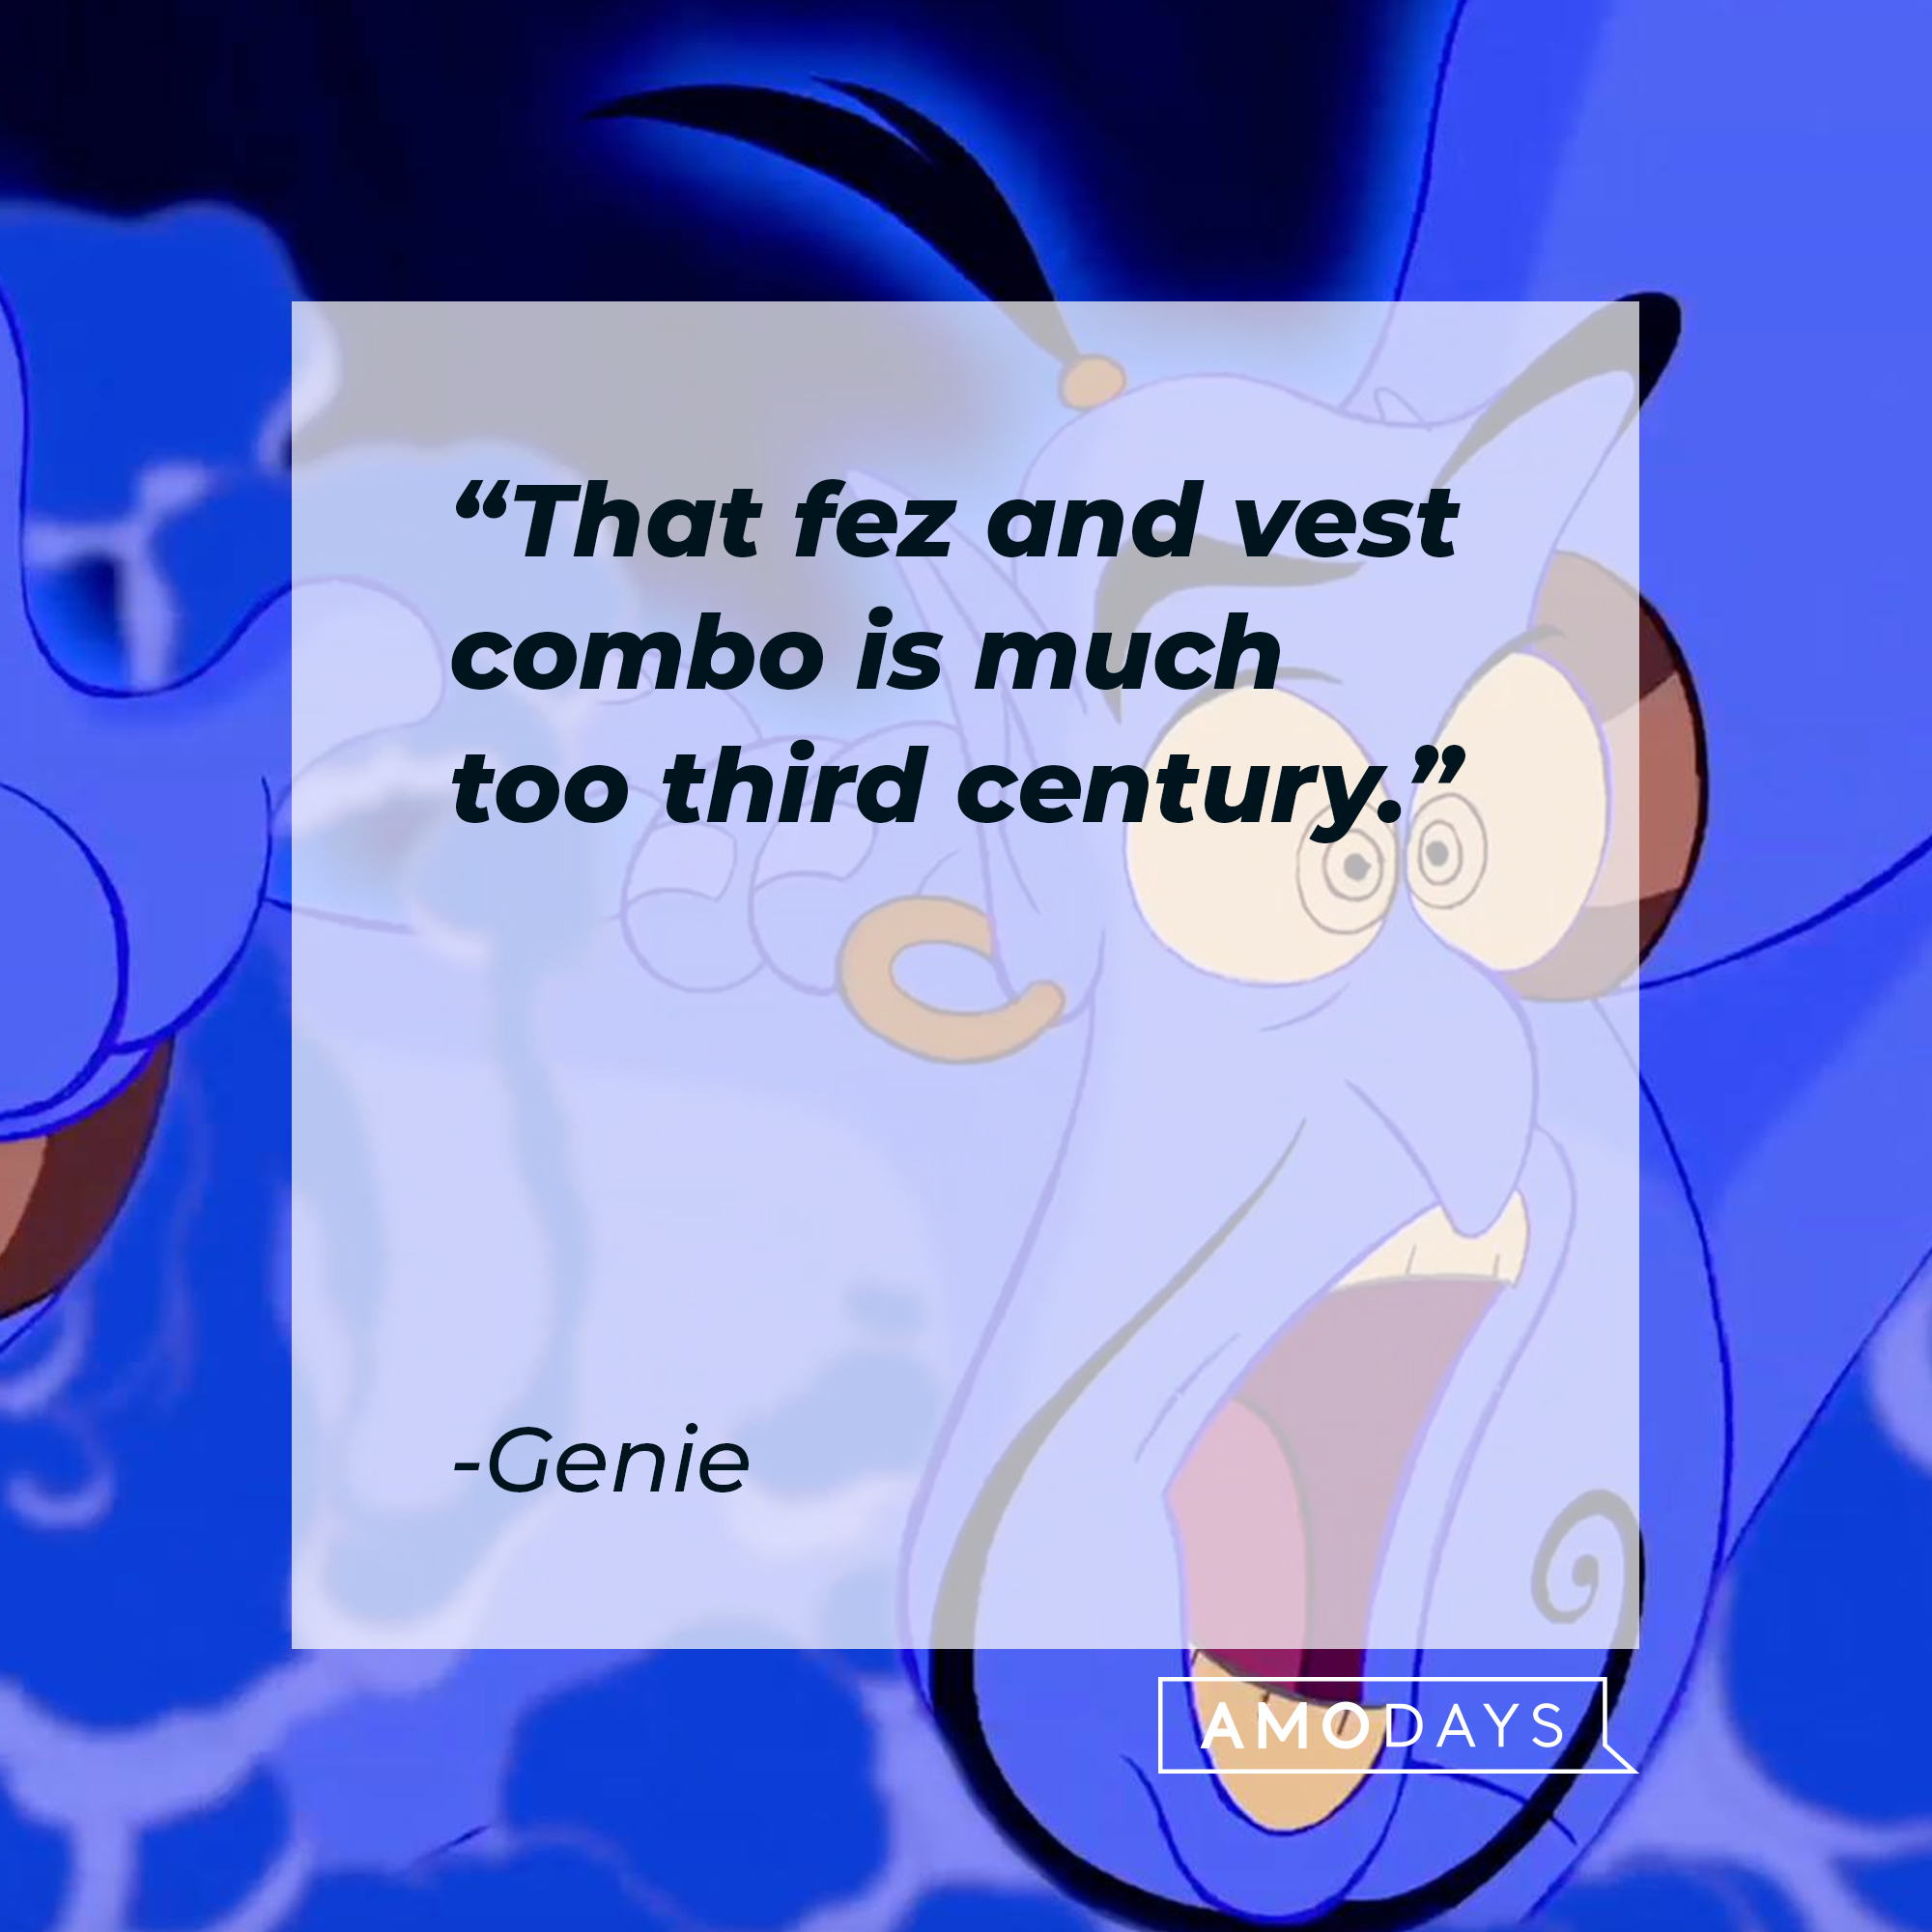 The animated Genie with his quote: "That fez and vest combo is much too third century." | Source: Facebook.com/DisneyAladdin